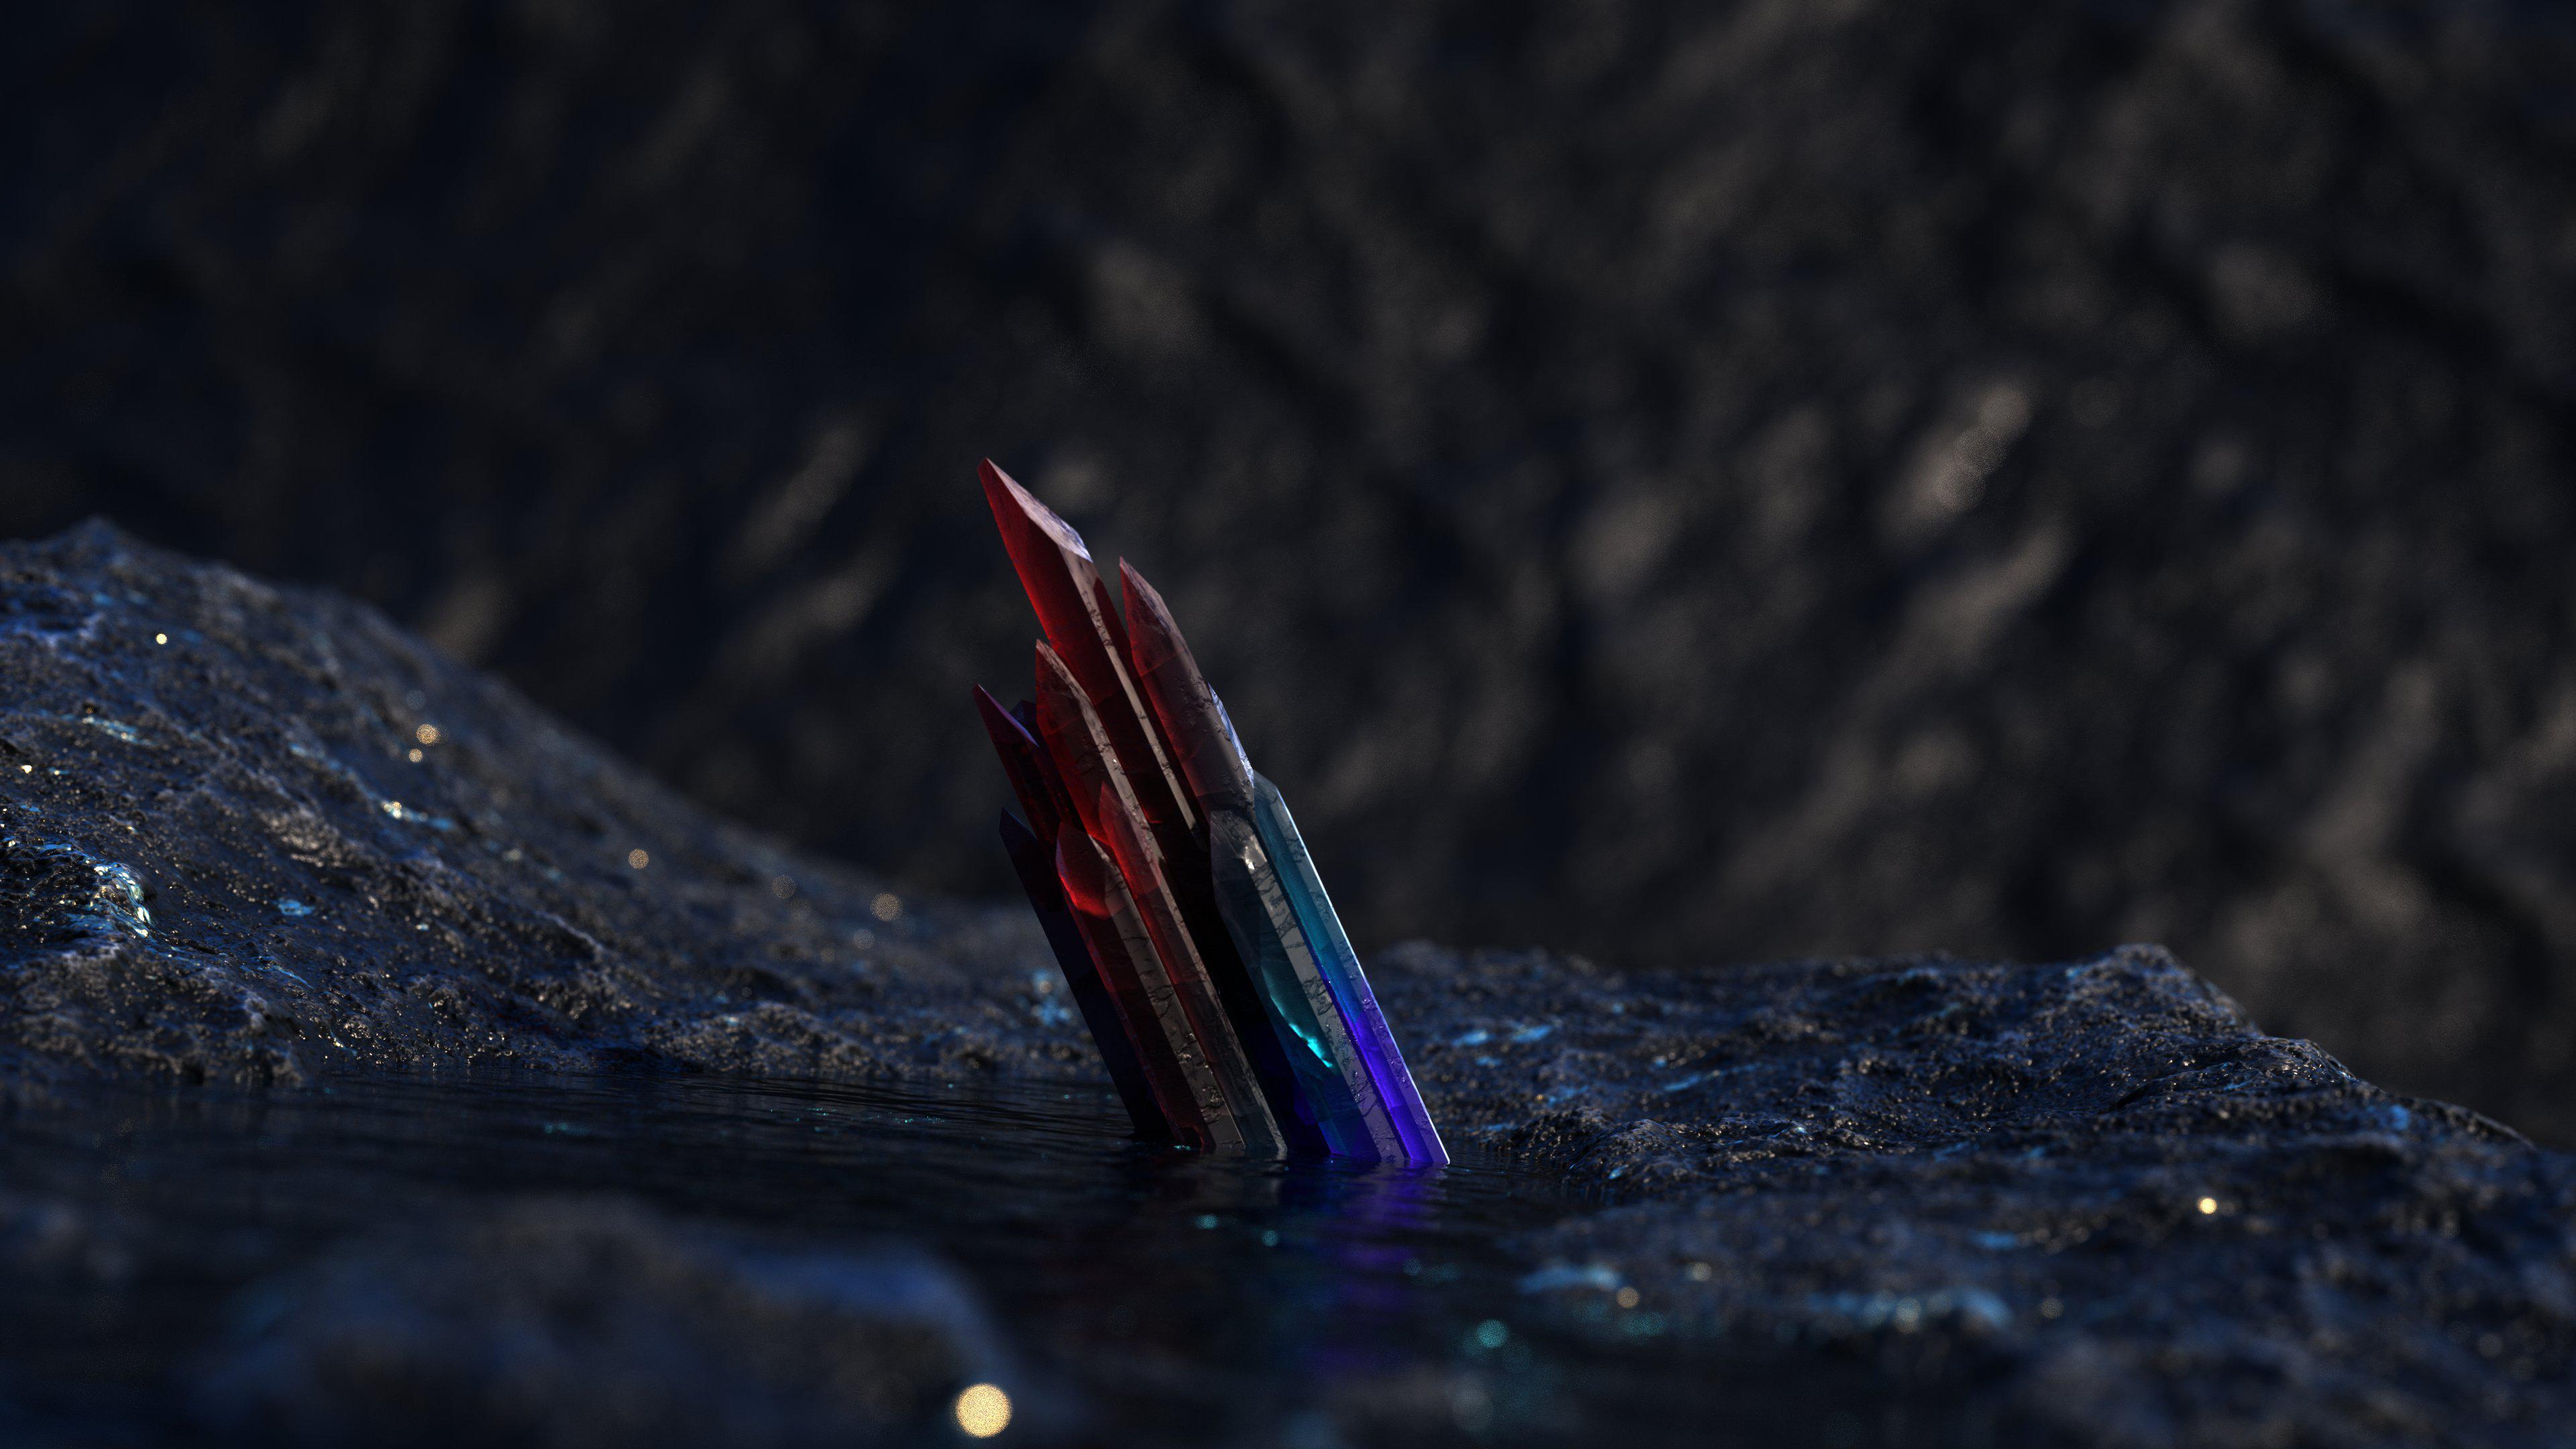 Crystal 4K wallpapers for your desktop or mobile screen free and easy to download